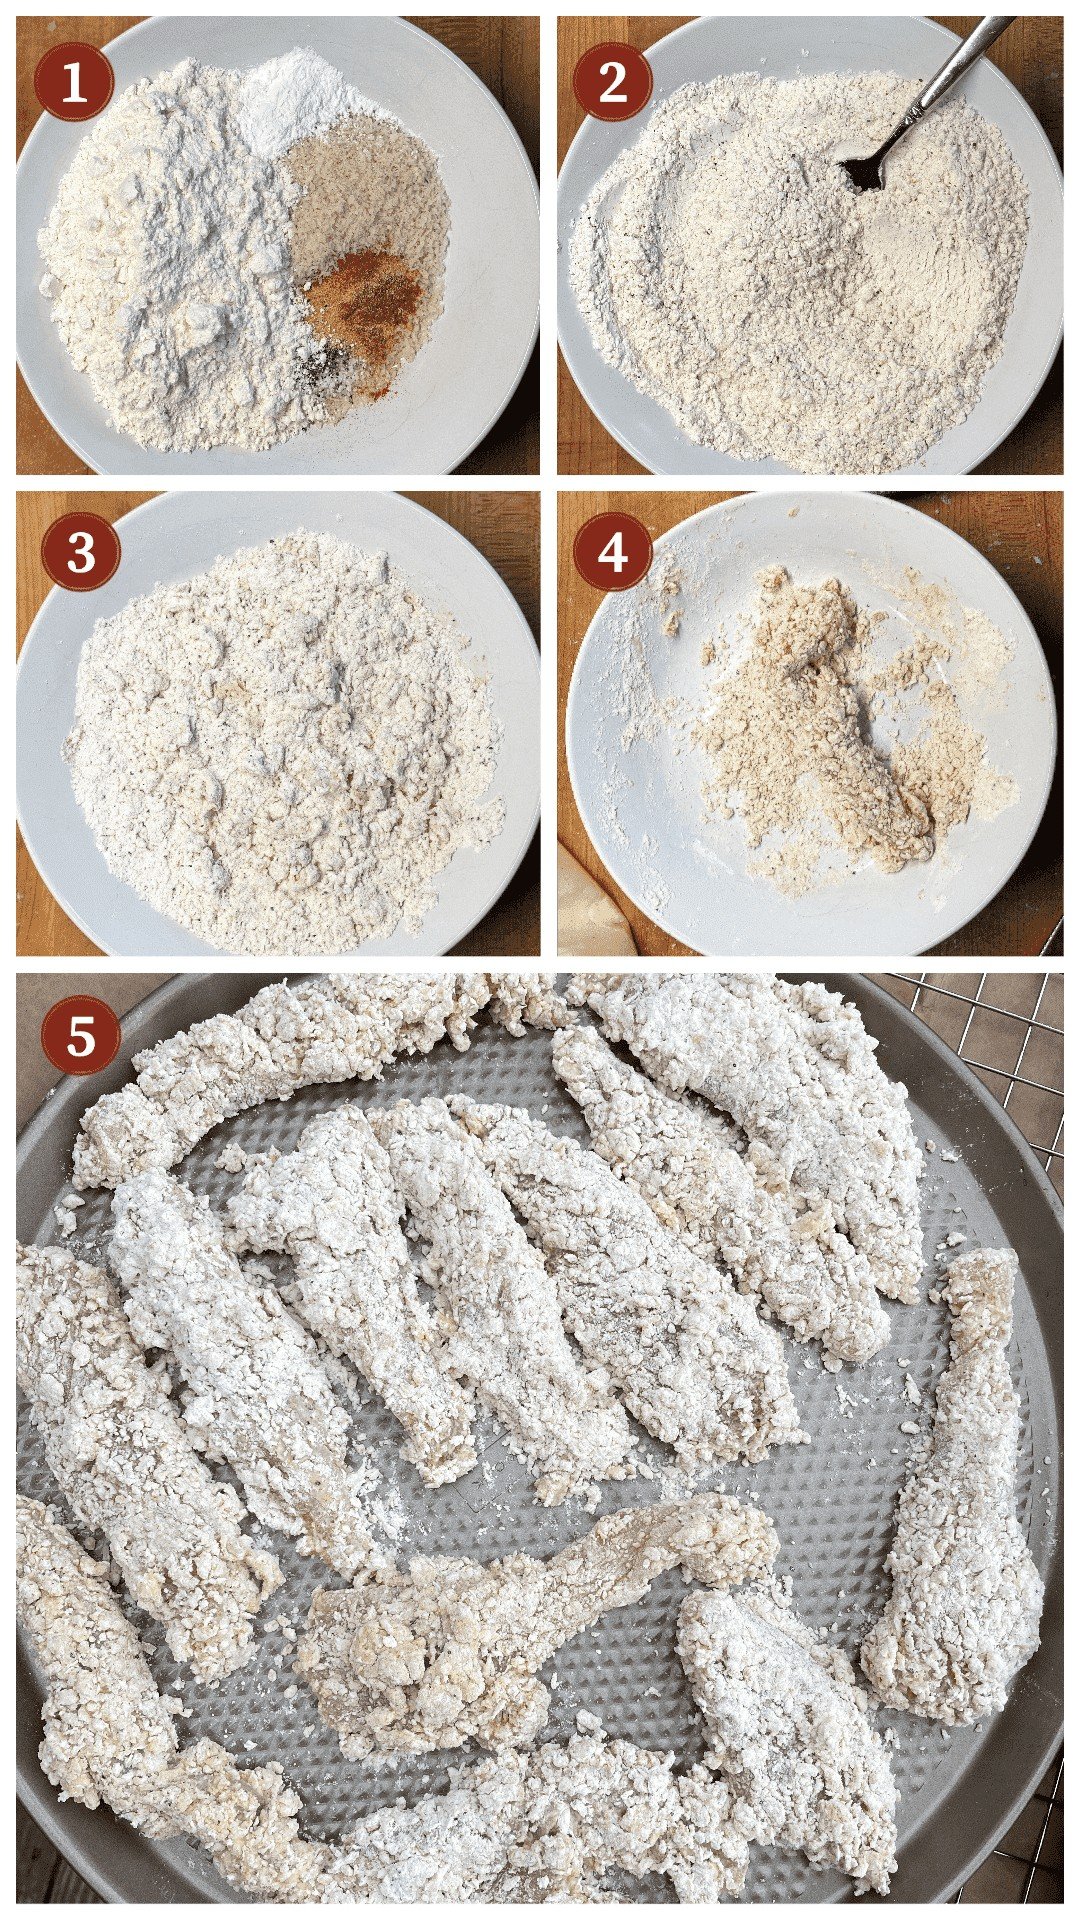 A collage of images showing how to bread buttermilk fried chicken tenders, step 1 - 5.